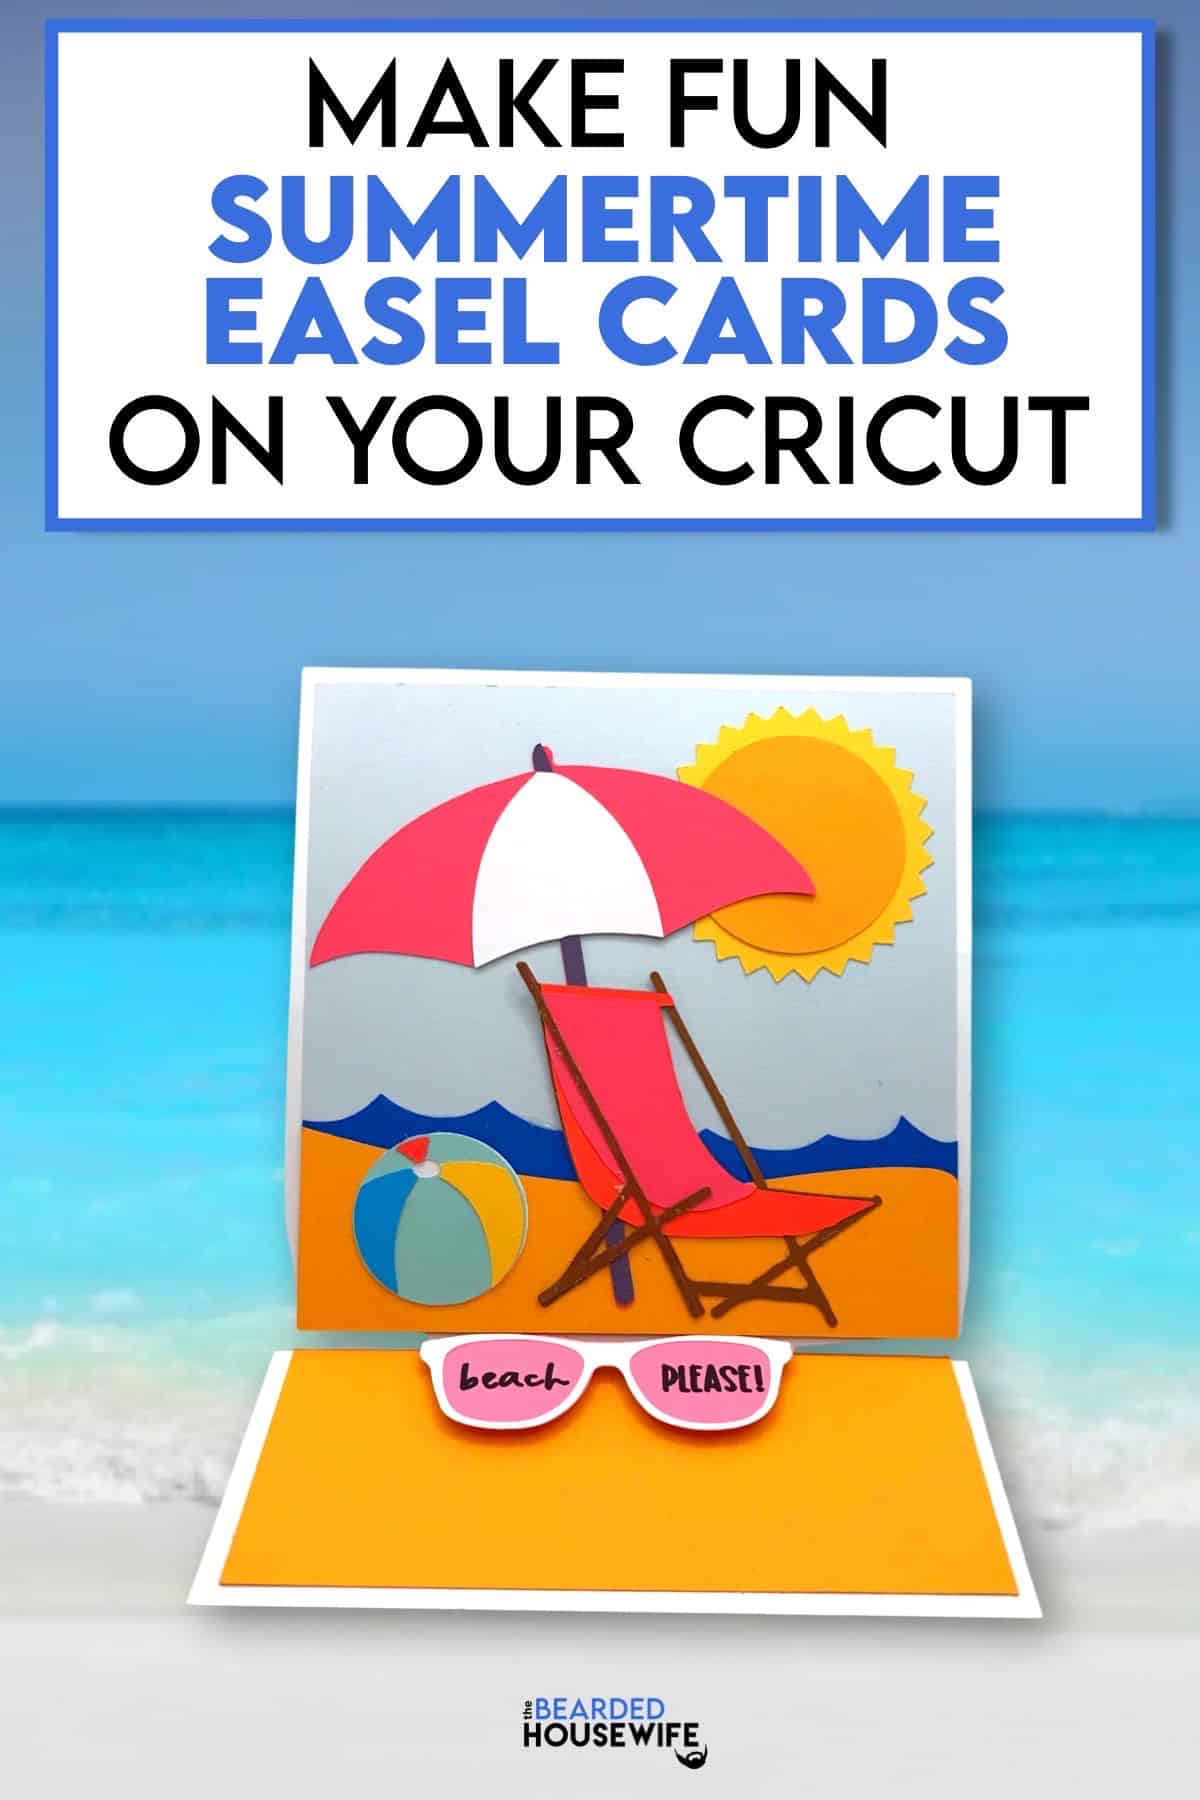 An easel card is opened on a fake backdrop of a sandy beach. The card features a paper lawn chair, beach ball, and sunglasses on a beach. The graphic above the card says, "Make Fun Summertime Easel Cards on your Cricut."